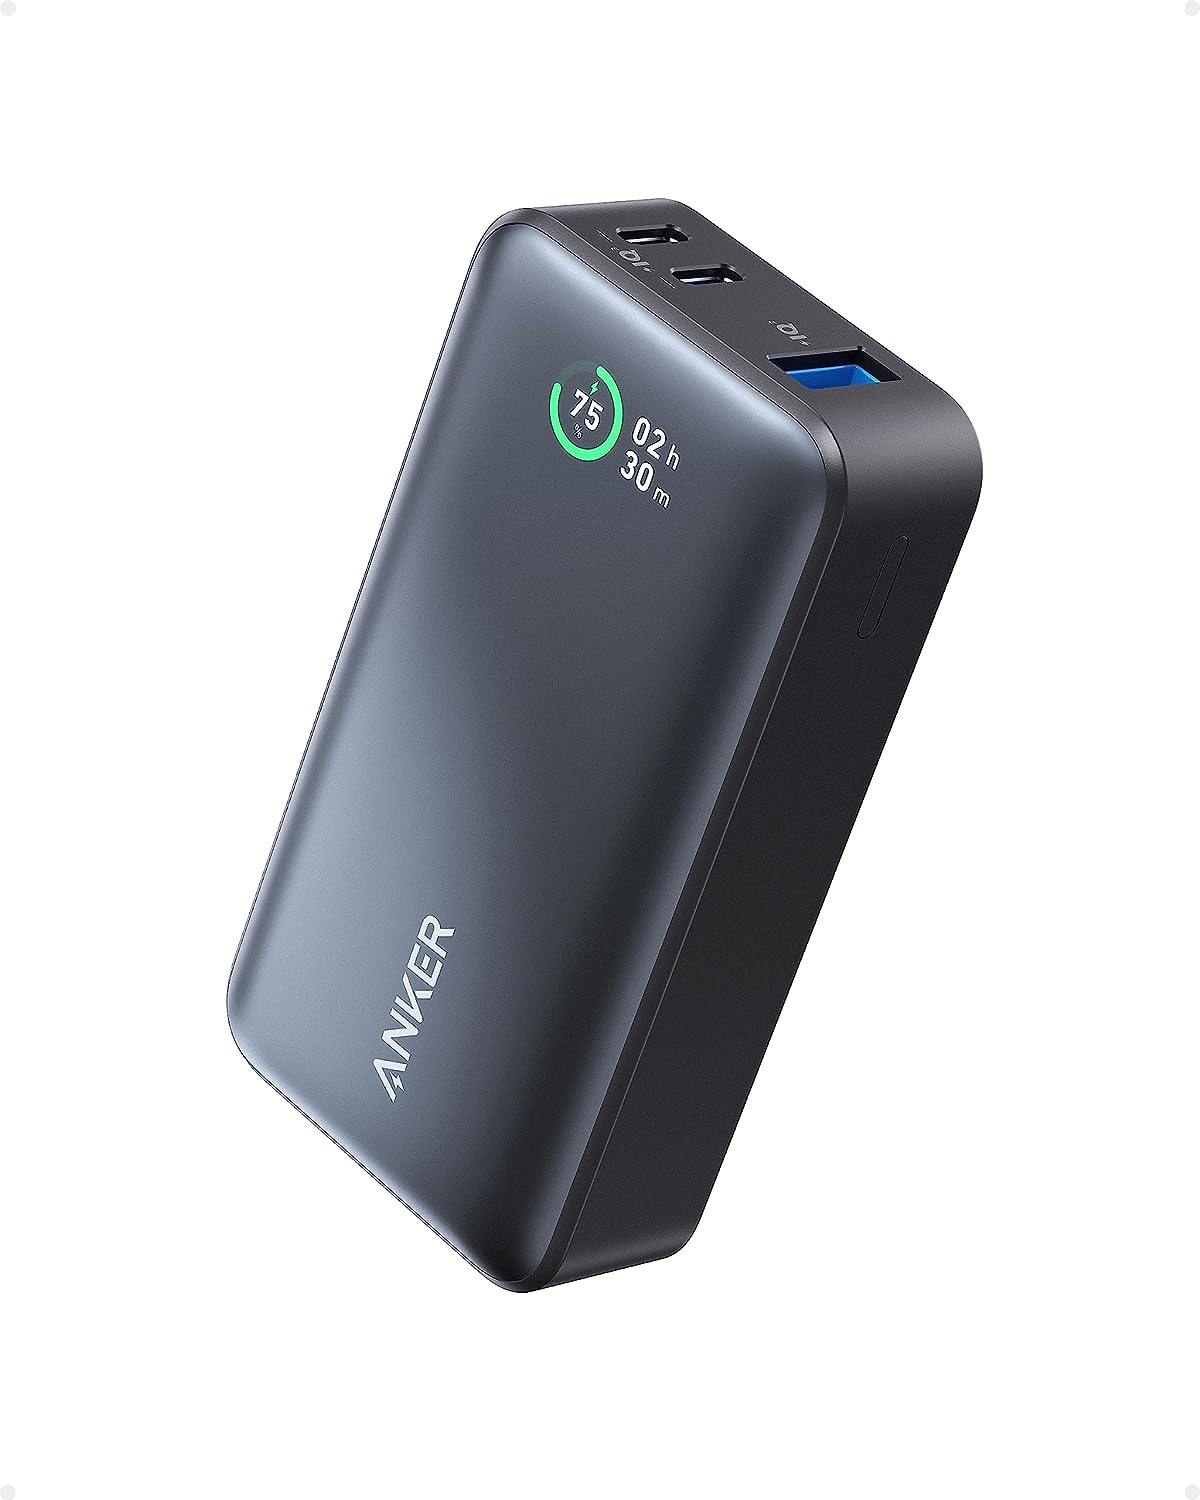 Anker Power Bank A1256H31 533 Power IQ 3.0 Portable Charger with PD 30W , 10,000mAh Battery